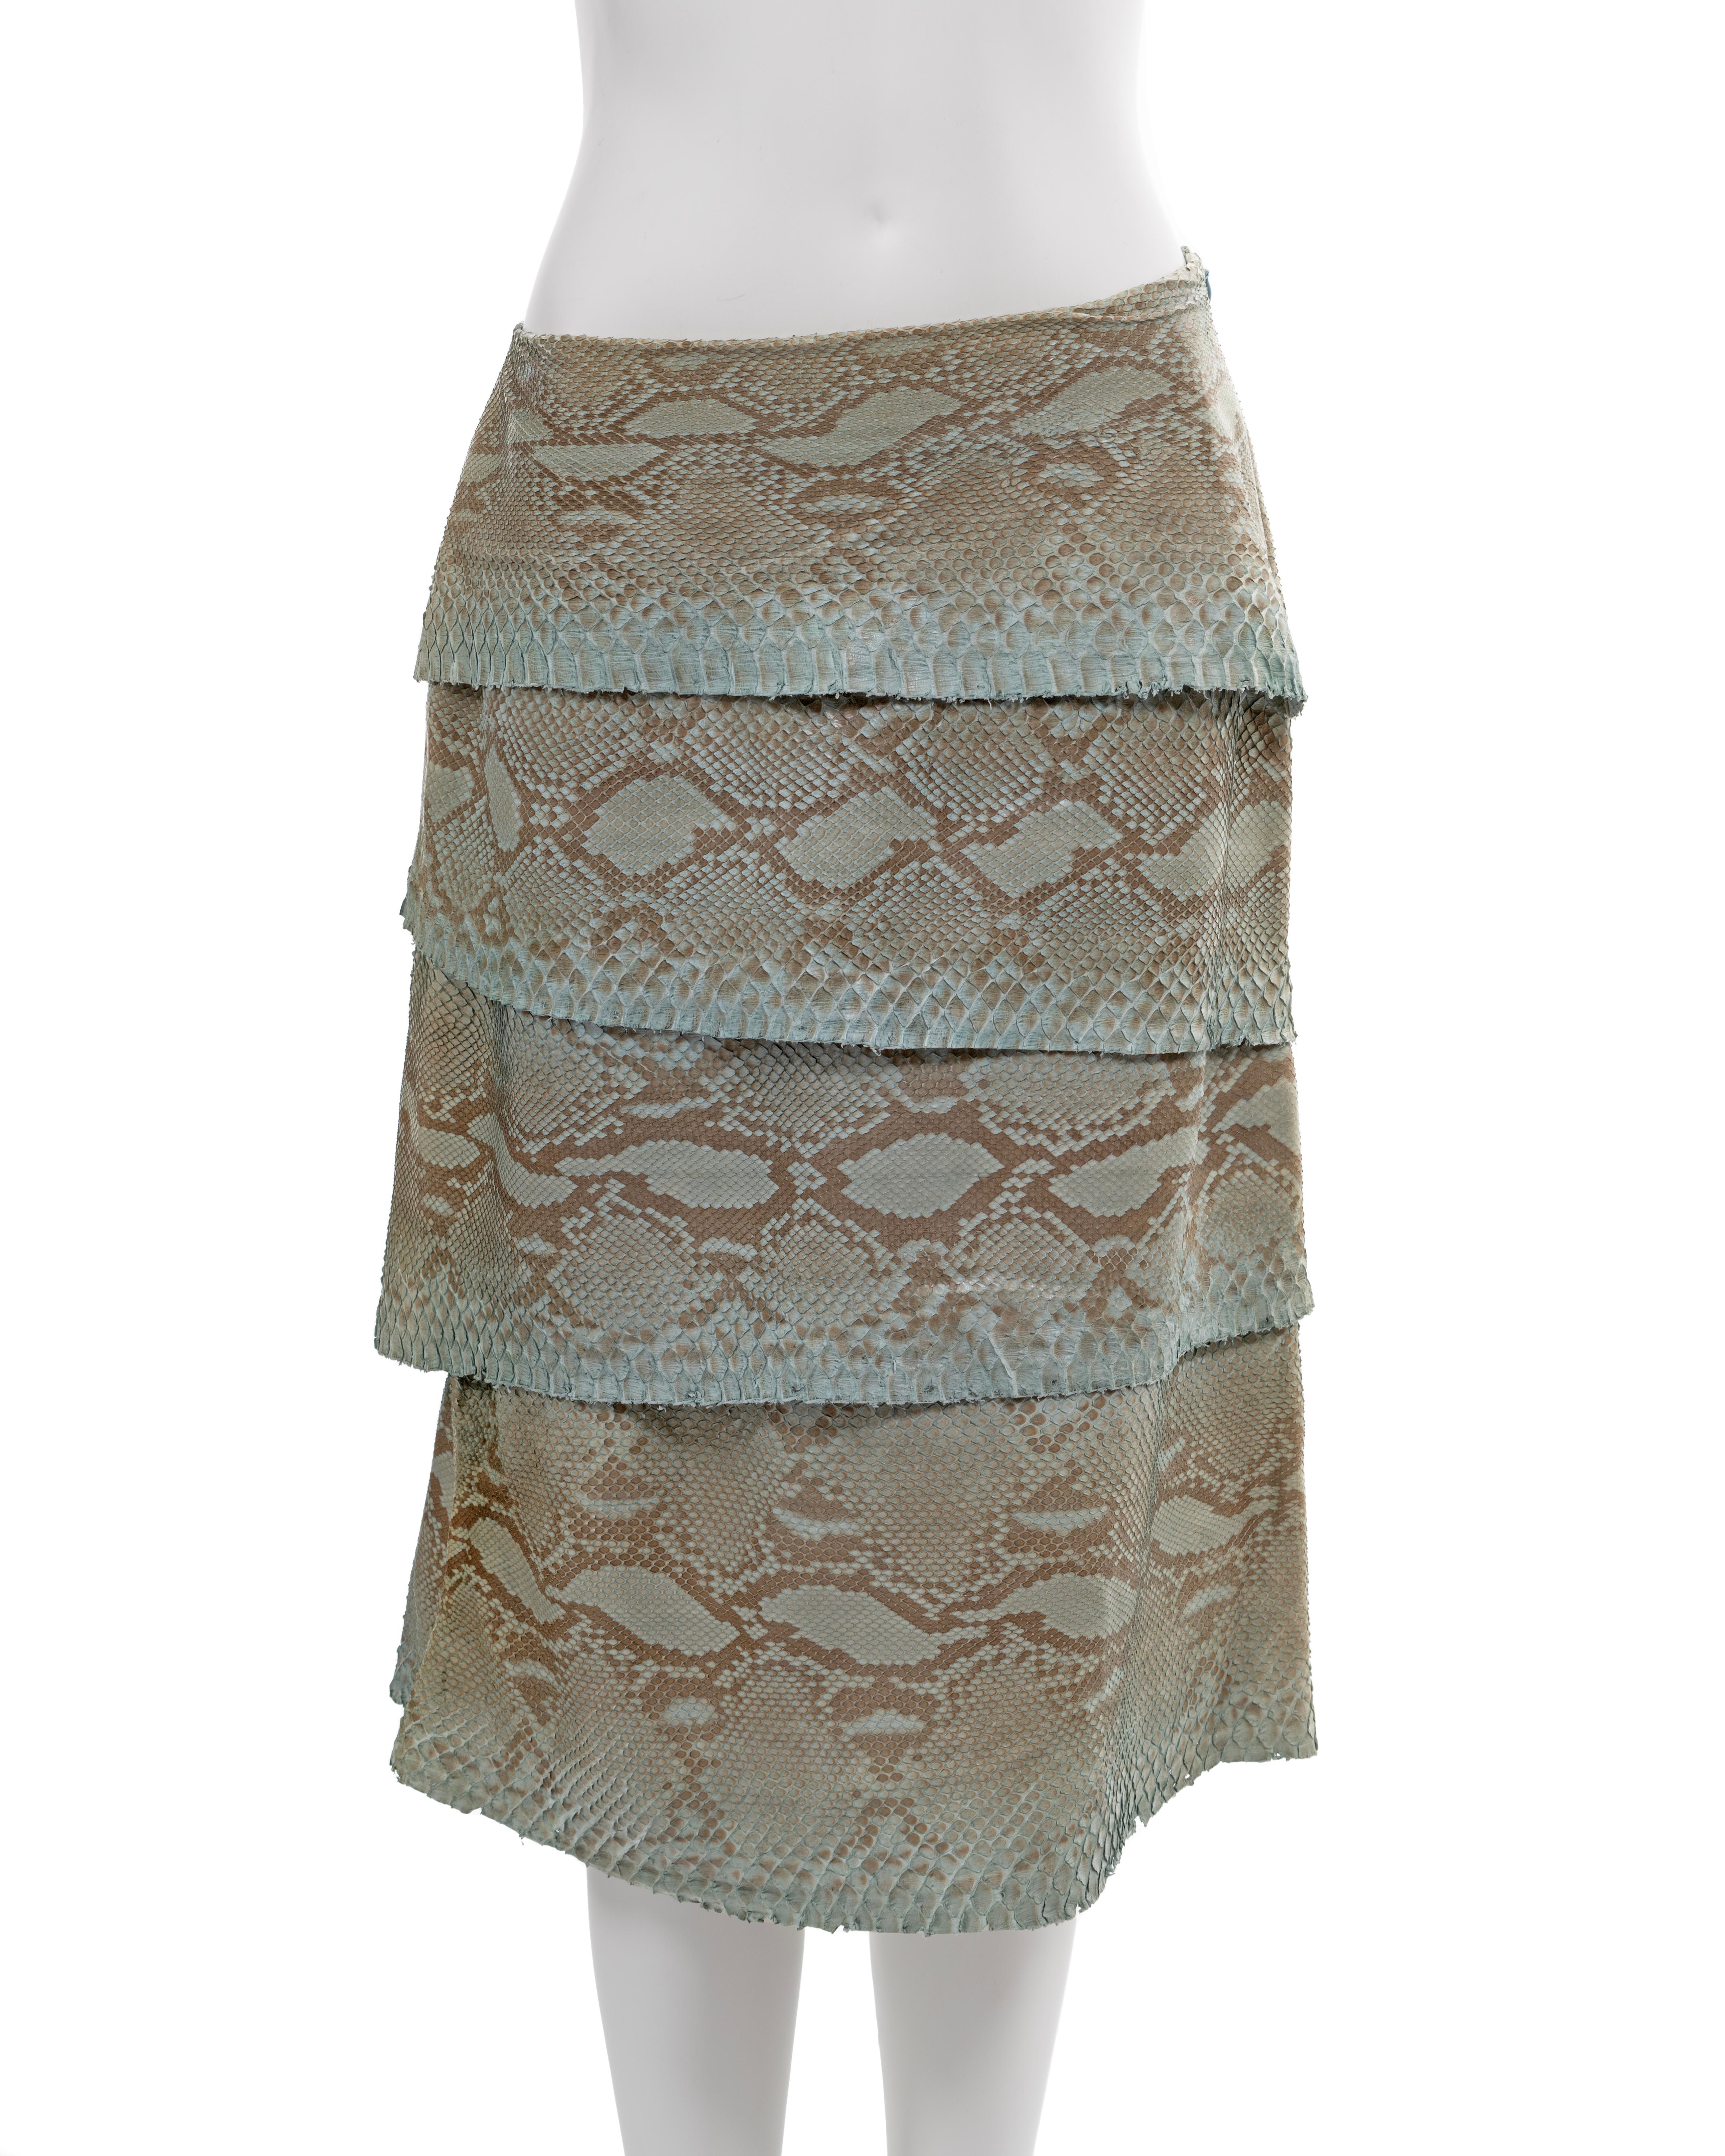 Gianni Versace turquoise python tiered skirt, fw 1999 In Excellent Condition For Sale In London, GB